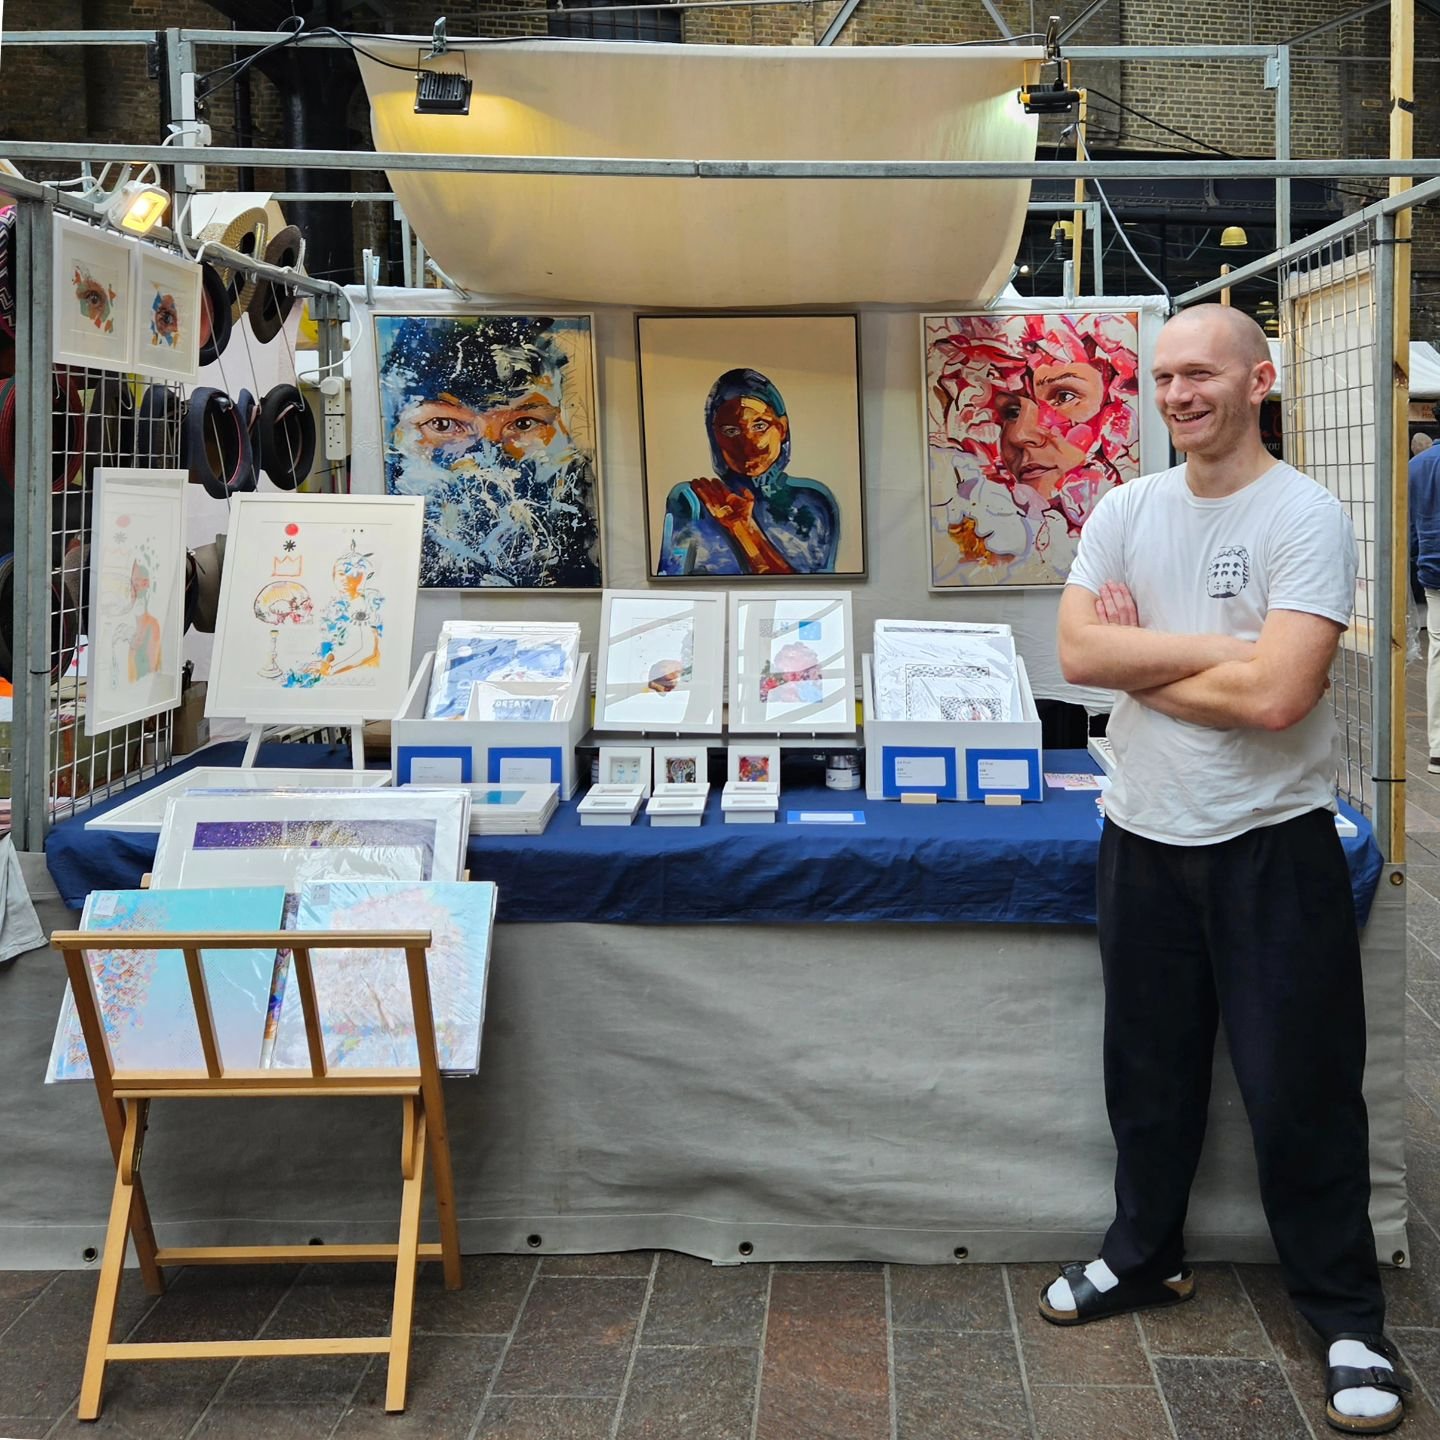 🌈 Announcing new market details: 

I'll be showing my work in Notting Hill on Saturday, 4th May, with @openartspaces. It's happening in Tavistock Square, right next to the famous Portobello Road! 

Open 10 - 5

If you're not sure what to expect from